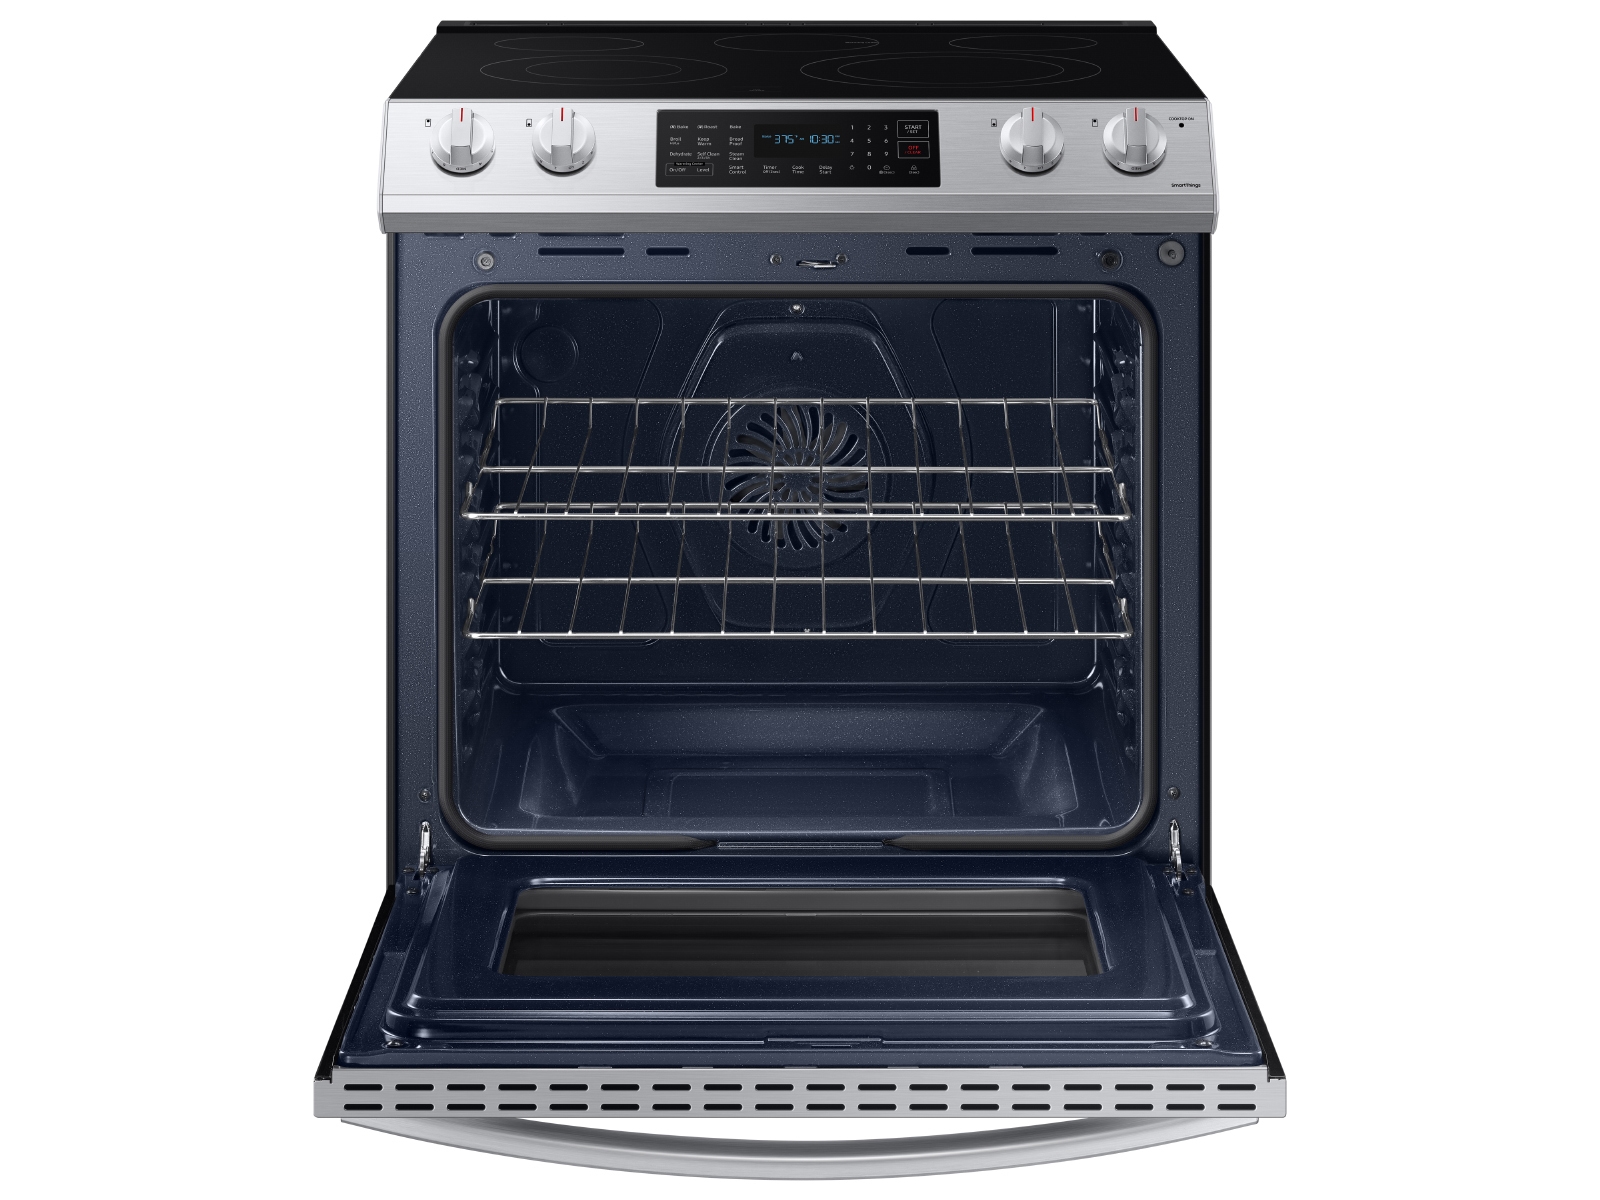 Samsung 30-inch Slide-in Electric Range with Wi-Fi Connectivity NE63T8